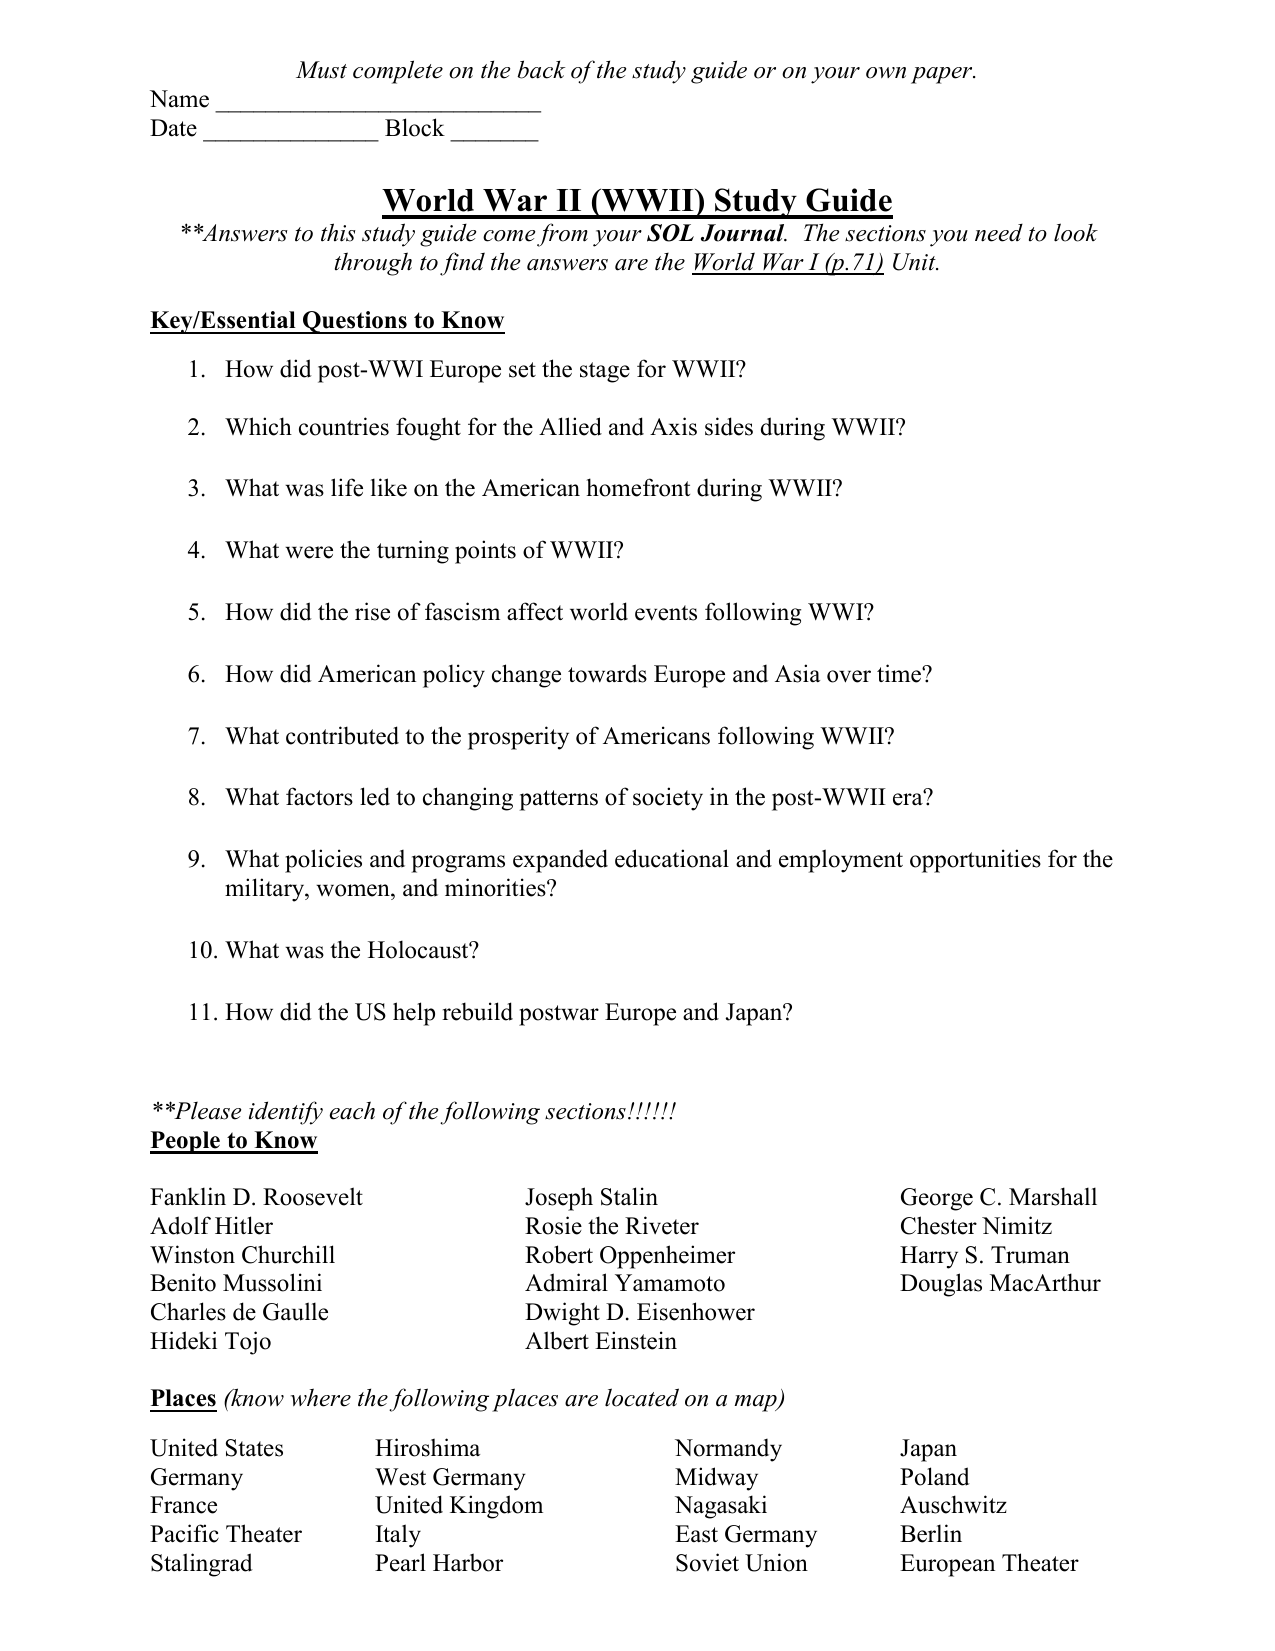 the-american-homefront-during-ww2-worksheet-answers-heavy-wiring